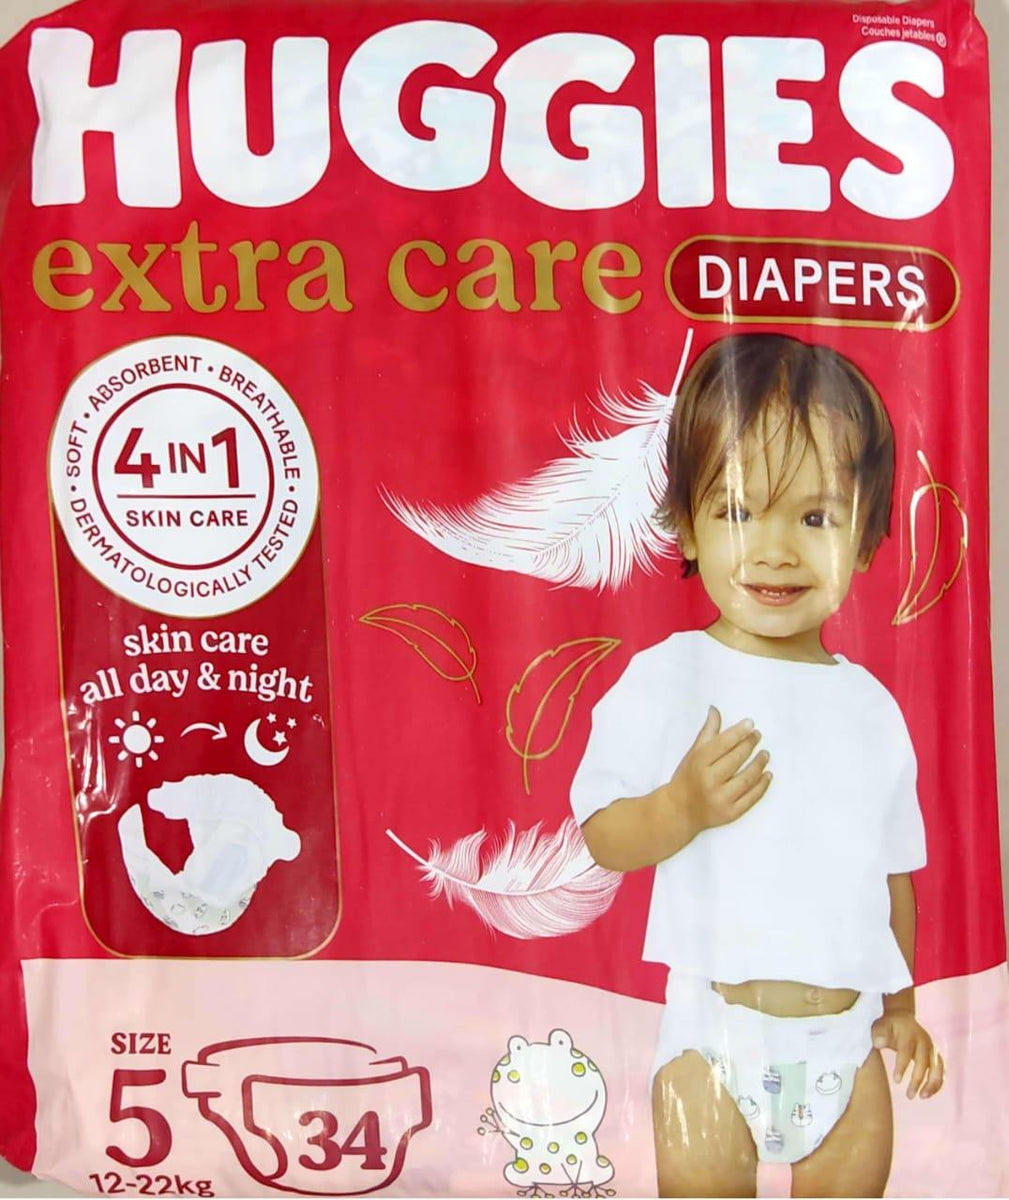 Huggies Extra Care Size 4 couches jetables